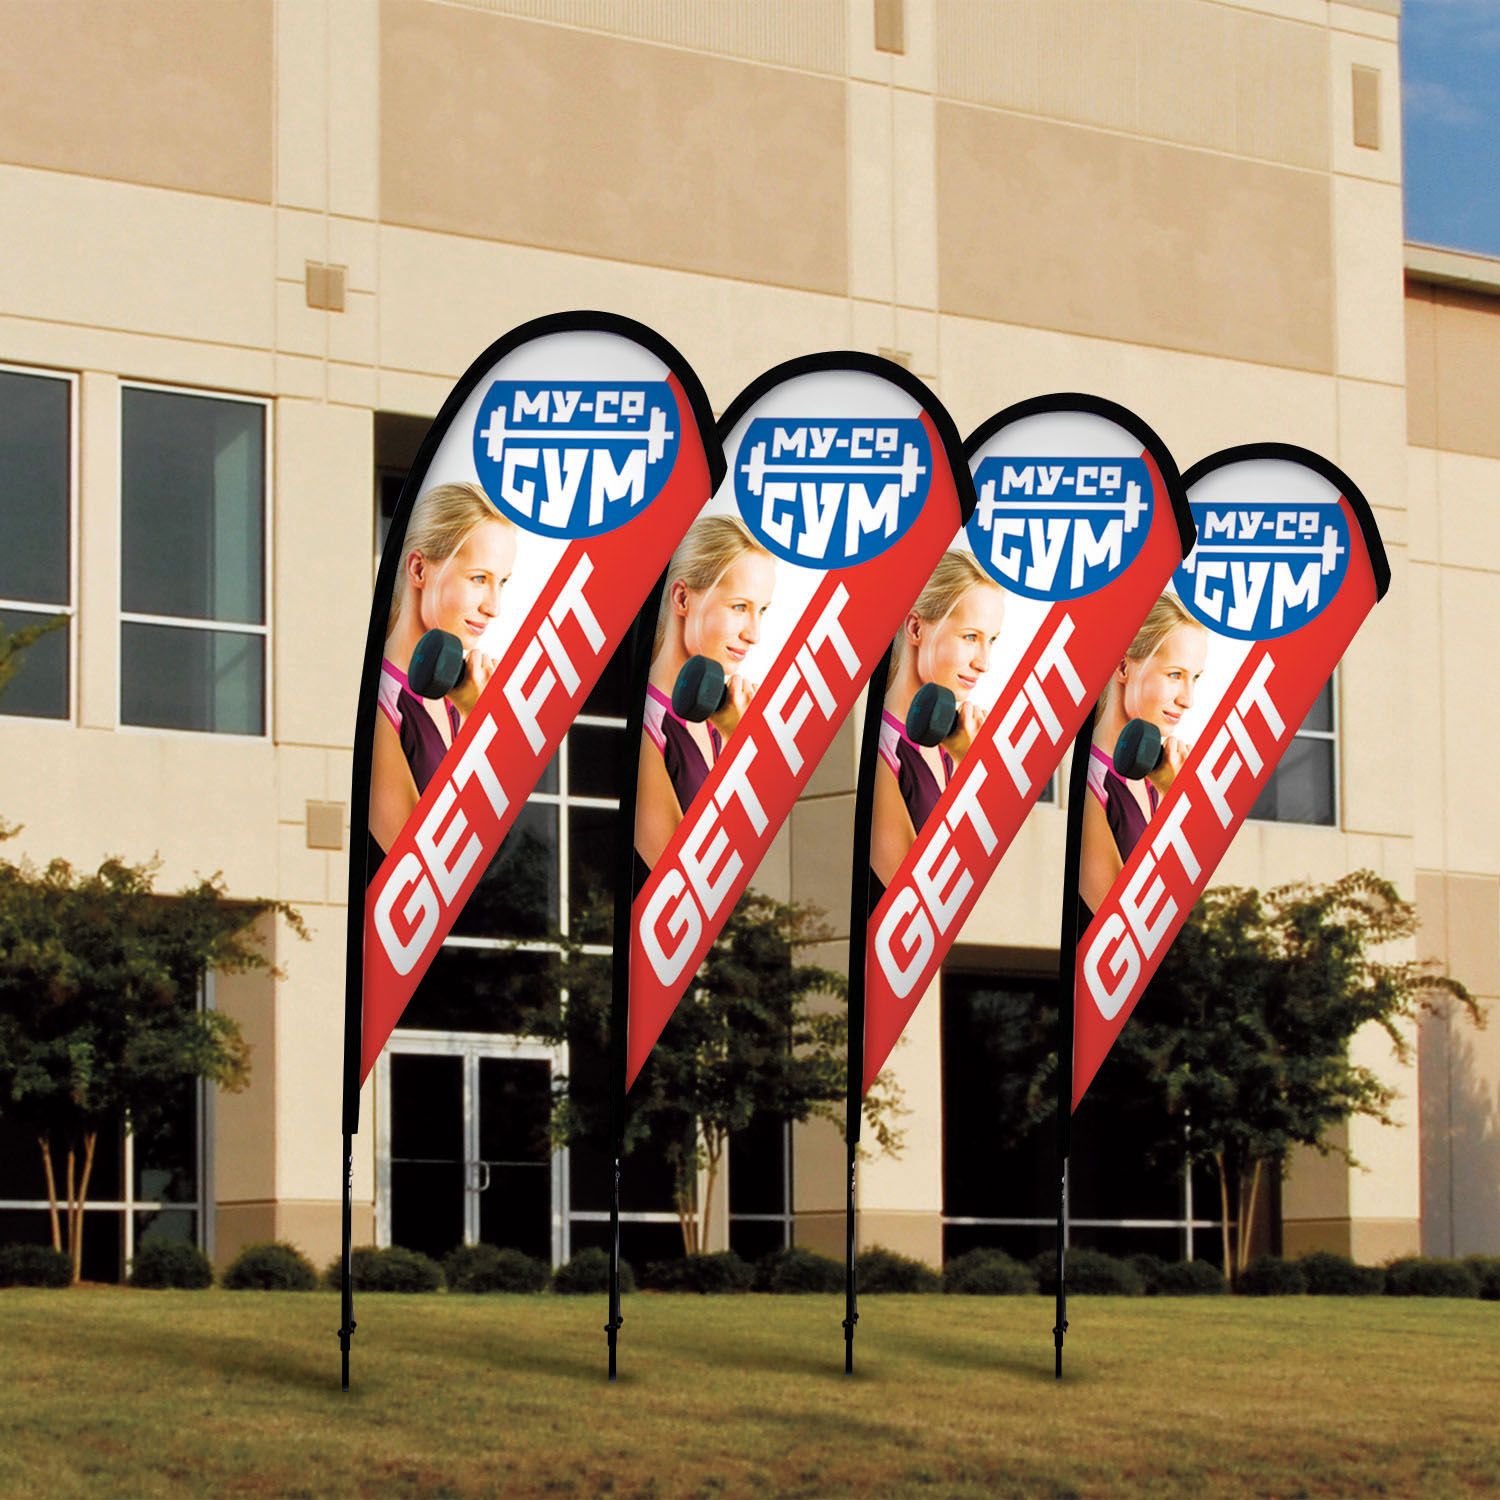 Several banners in front of a building with medium confidence